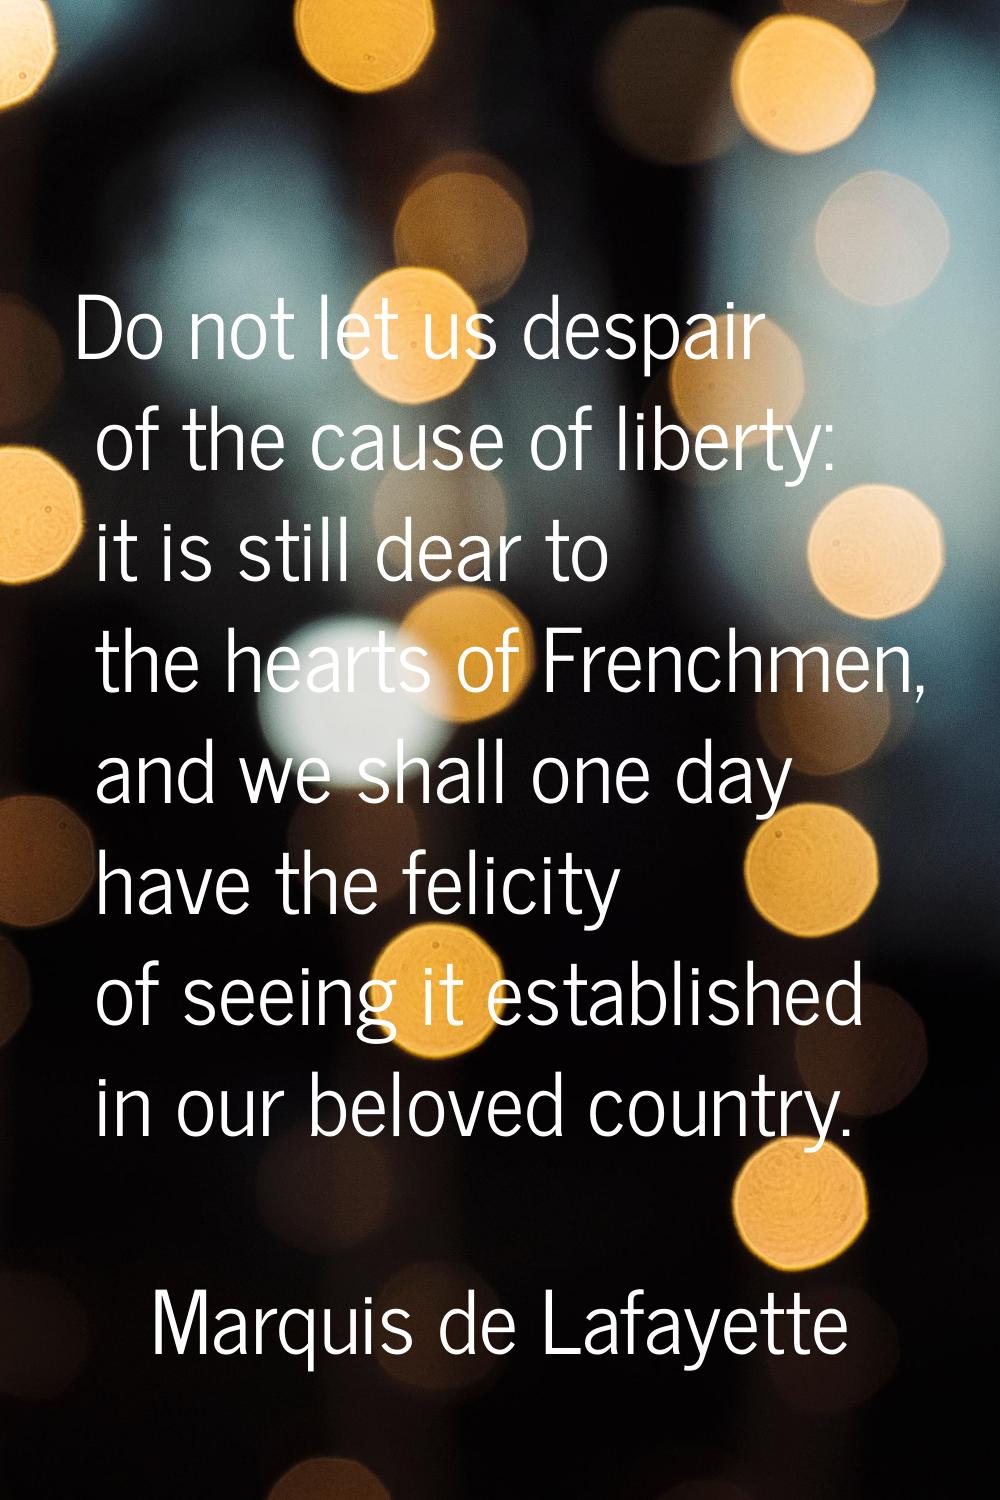 Do not let us despair of the cause of liberty: it is still dear to the hearts of Frenchmen, and we 